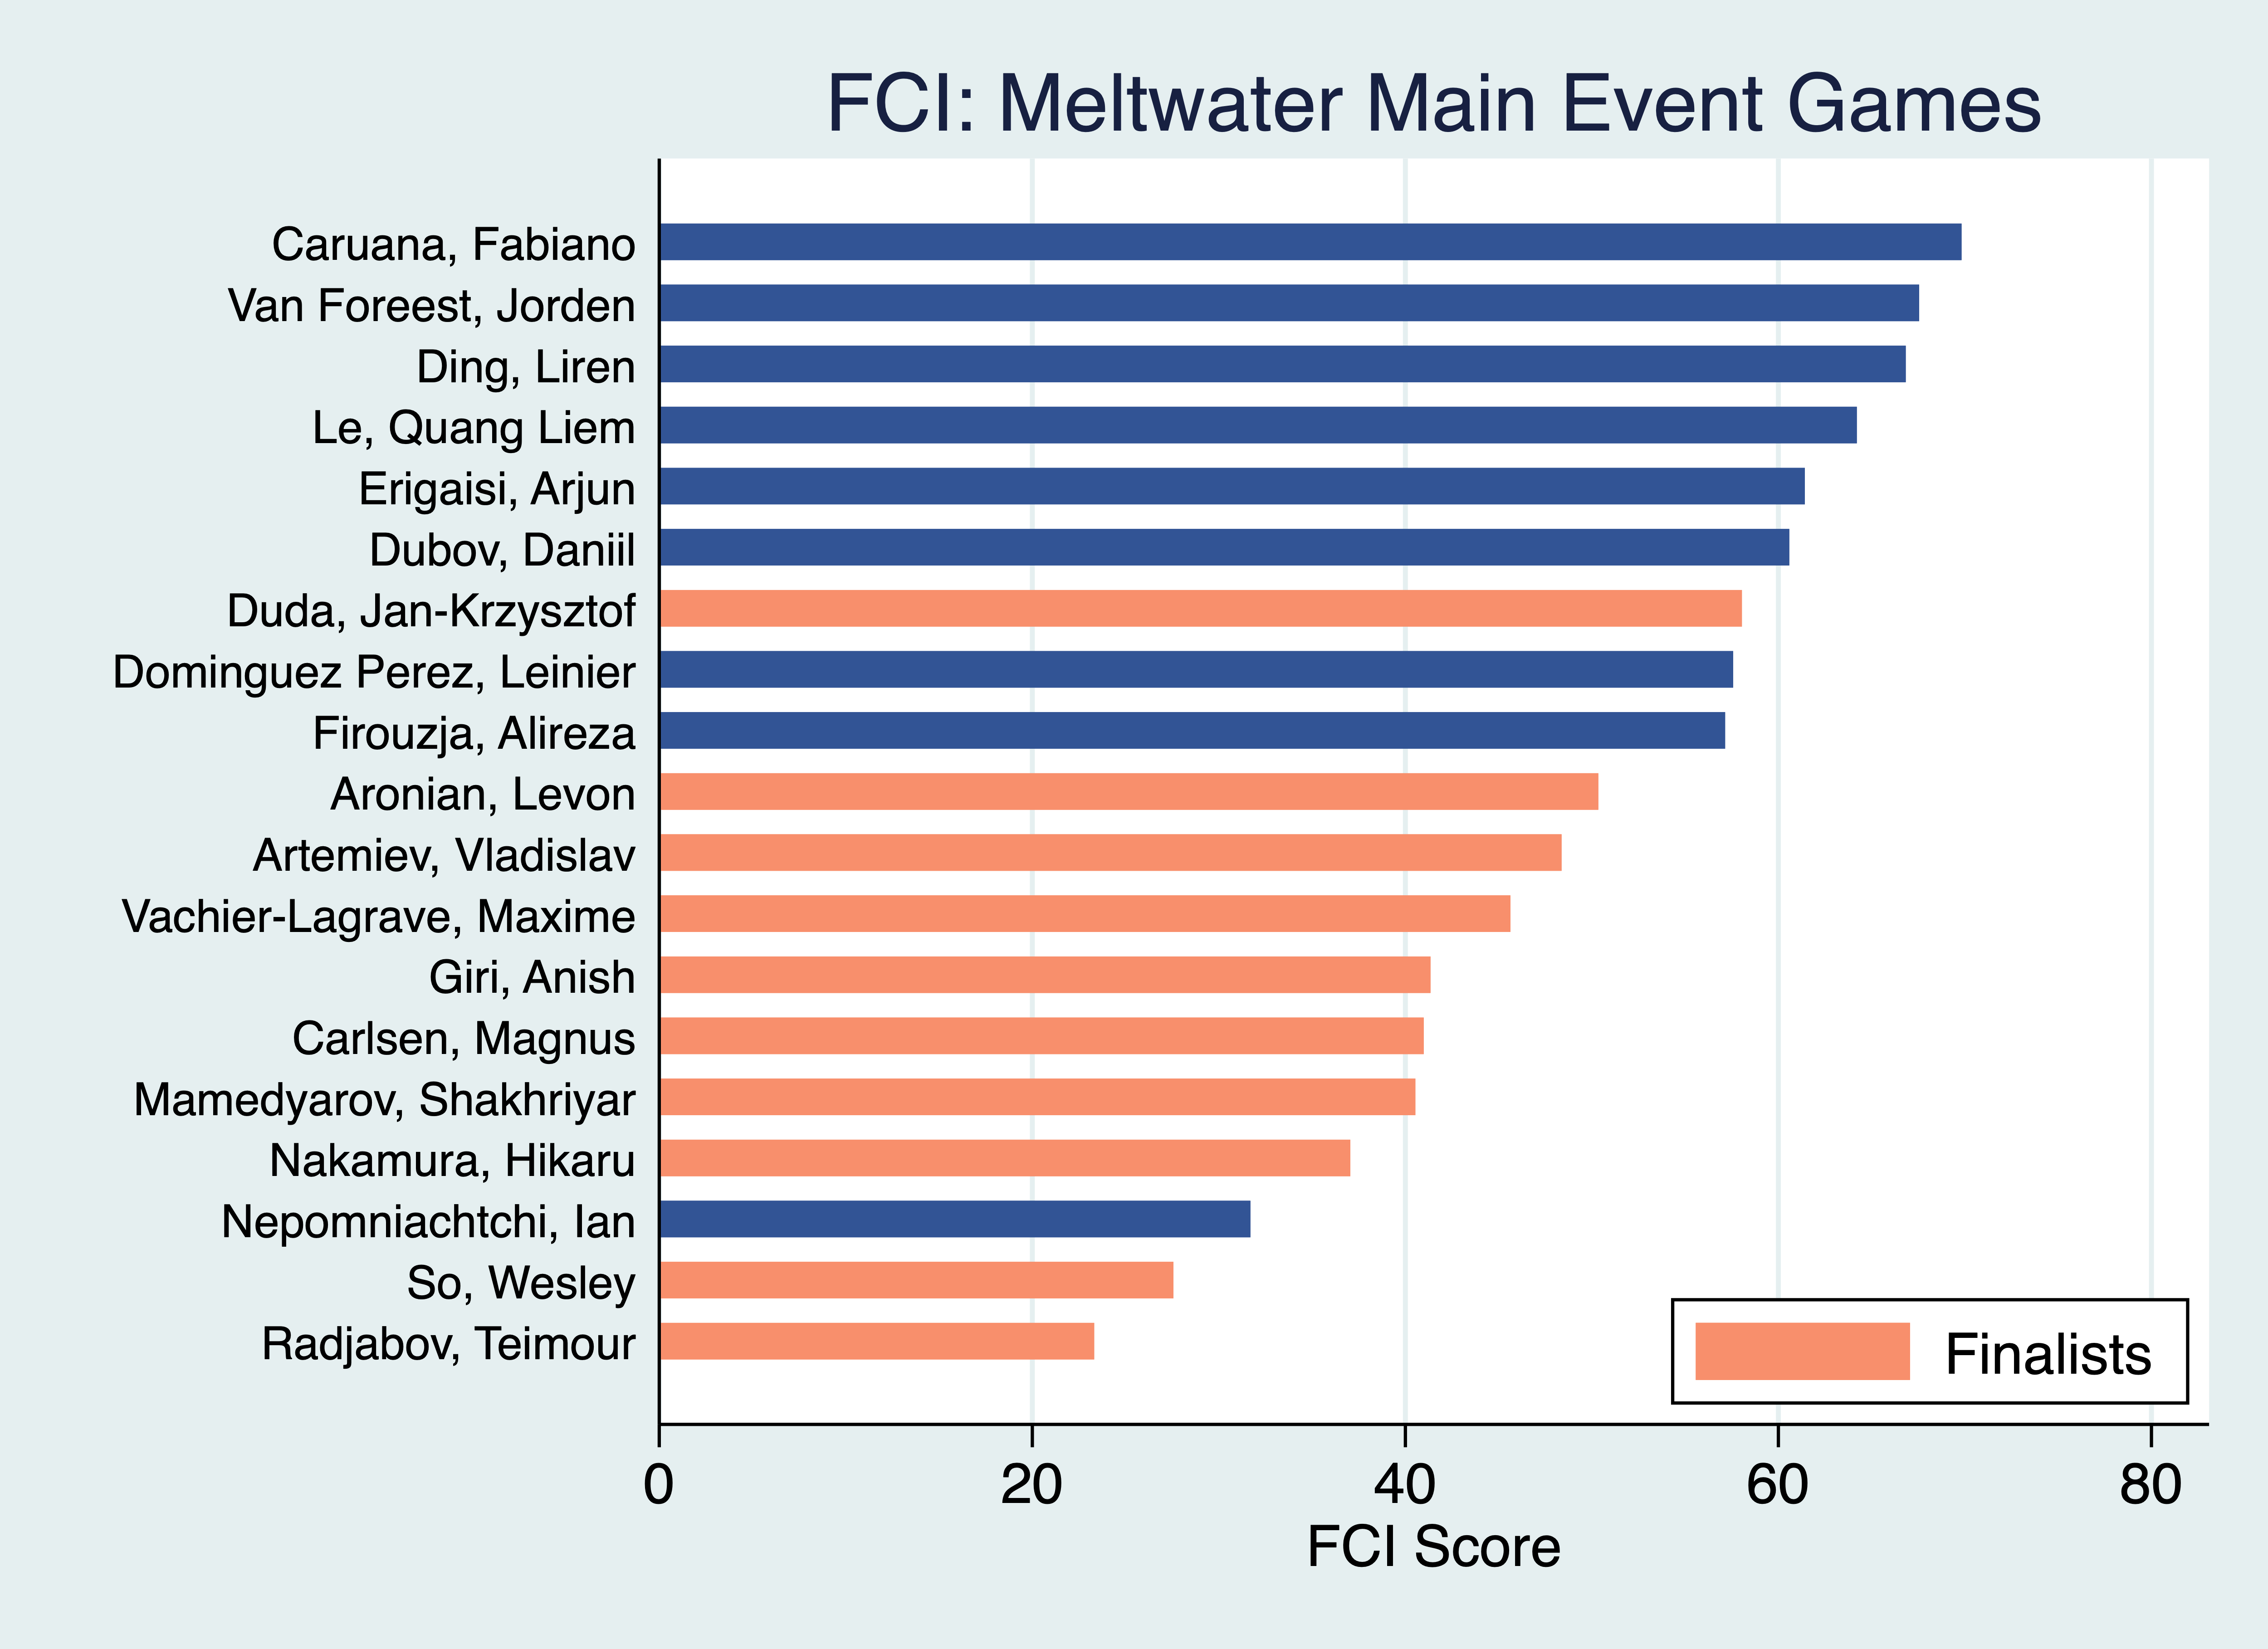 Meltwater Champions Chess Tour: viewership results of the series